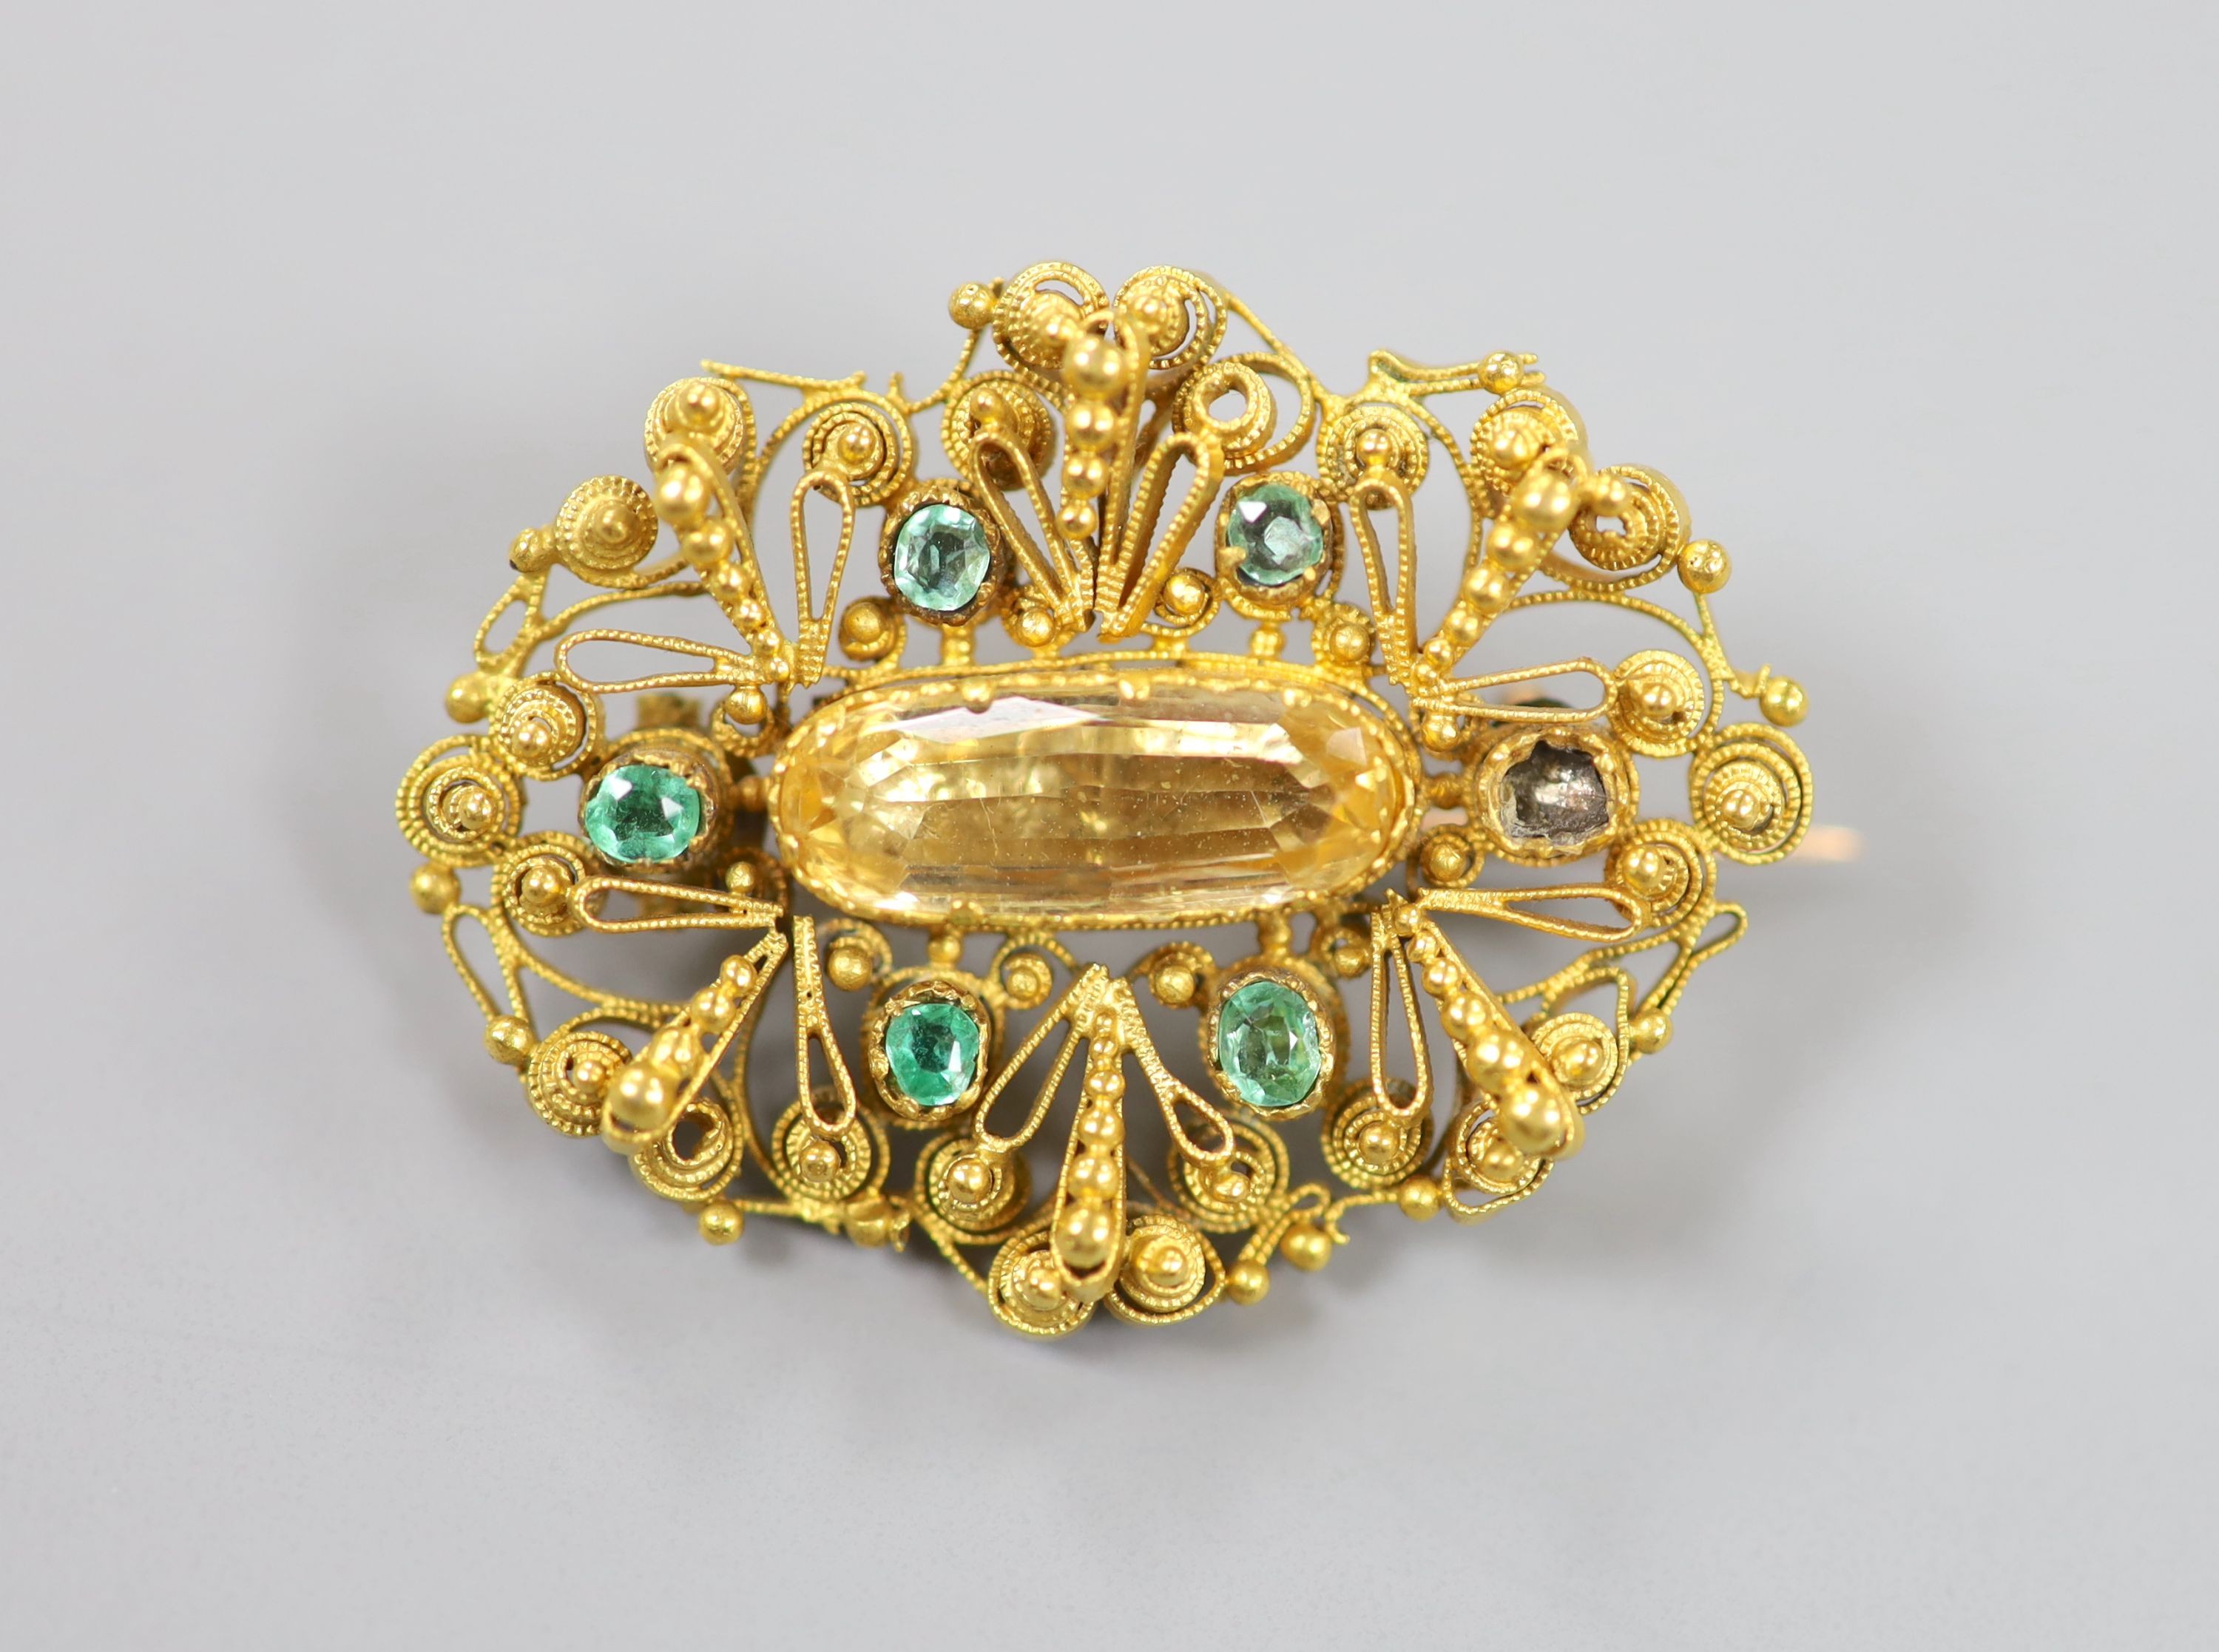 An early 20th century filigree yellow meta, emerald and citrine set oval brooch (emerald missing), 35mm, gross weight 8.4 grams.